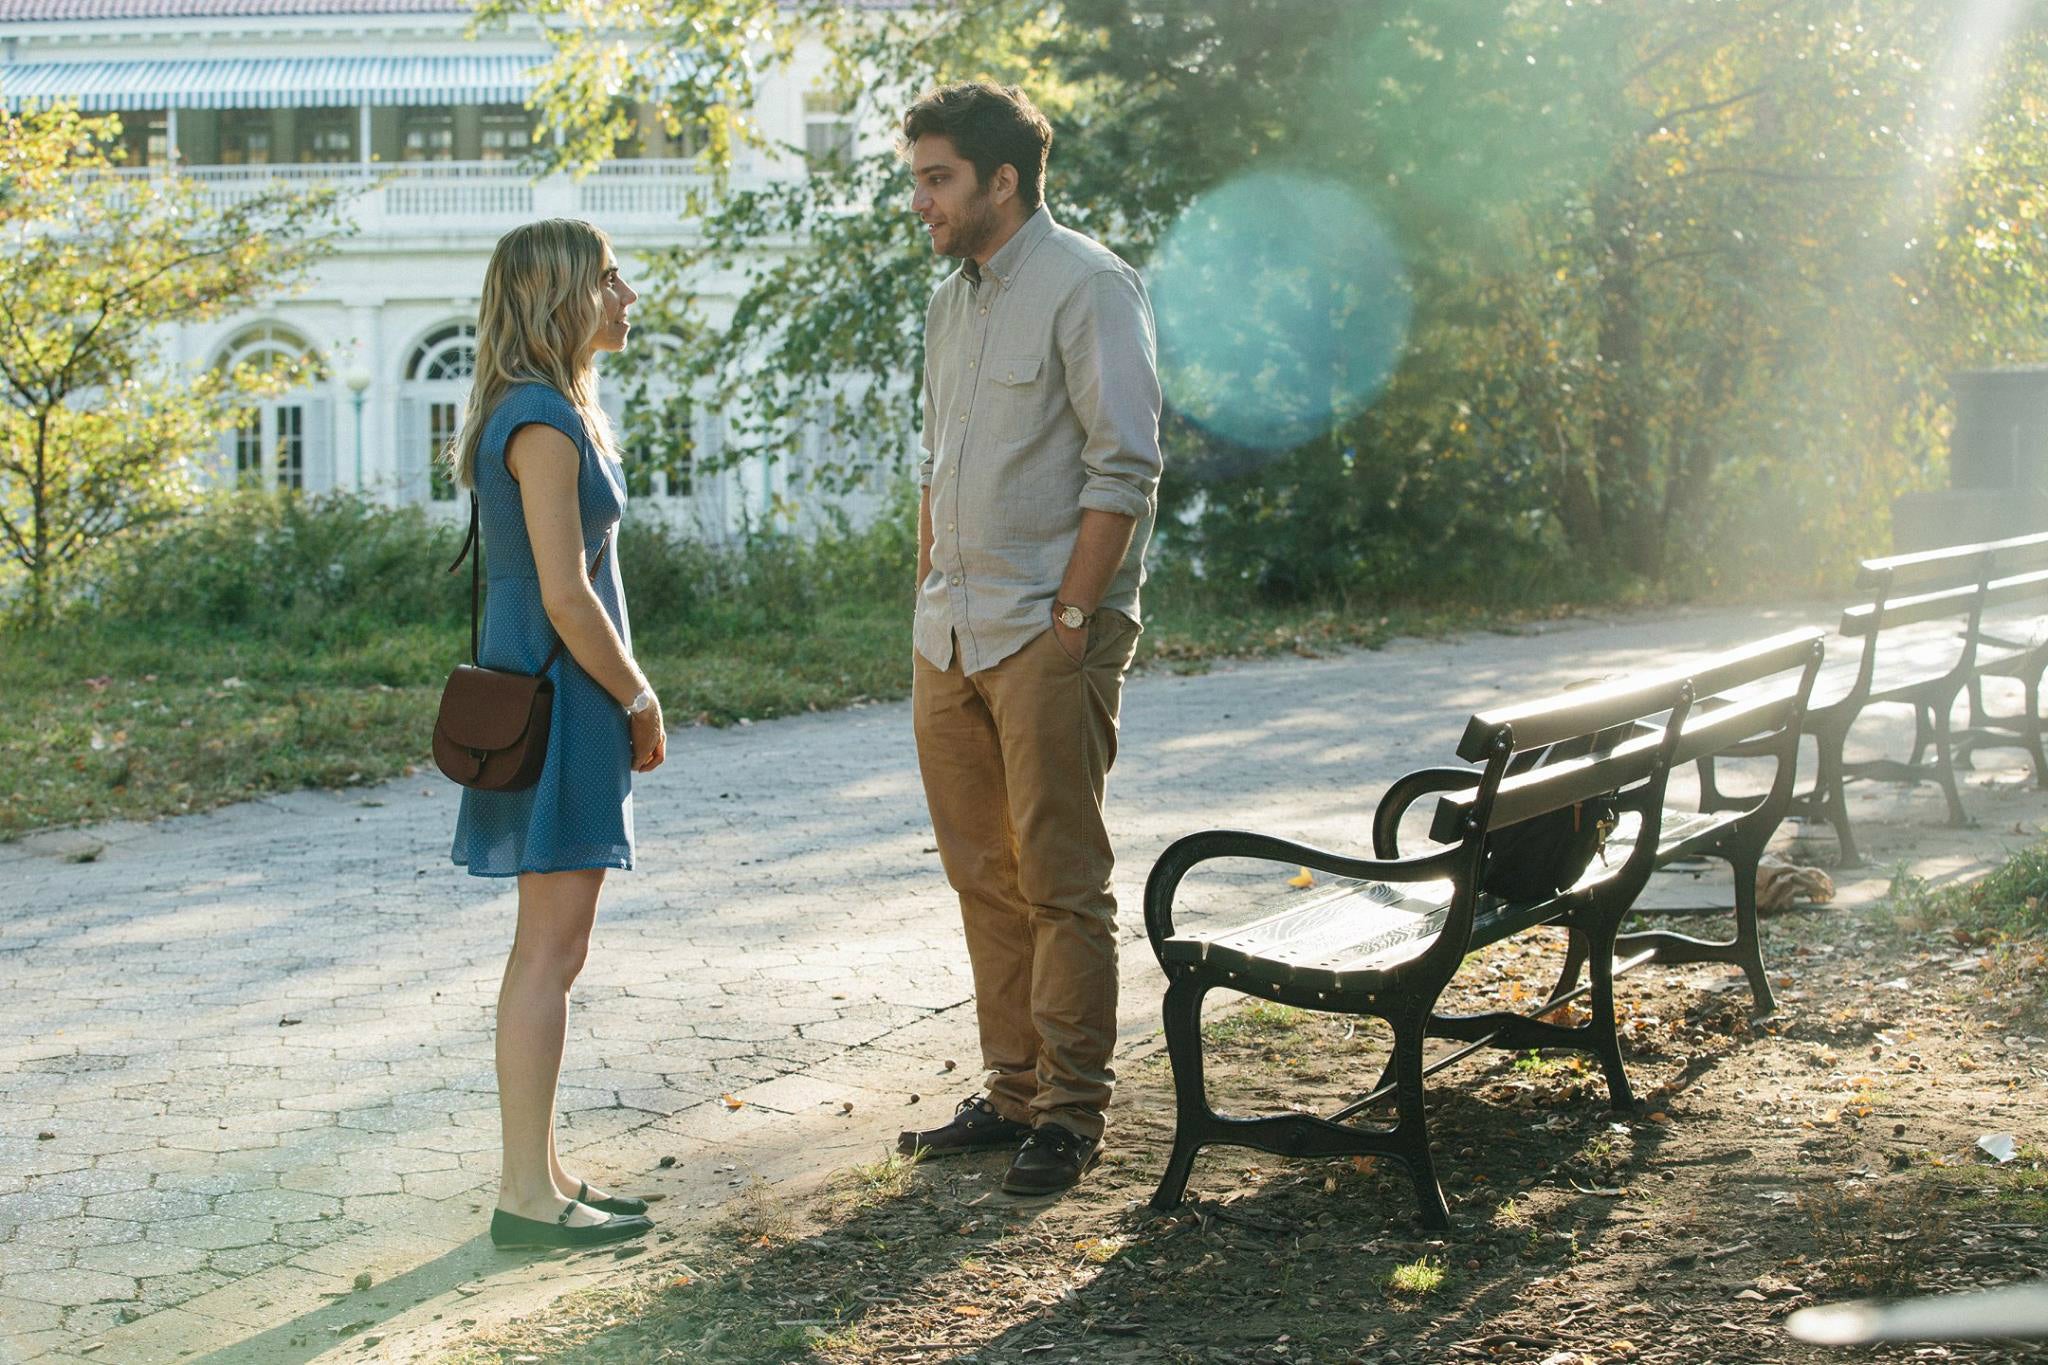 Zosia Mamet and Matthew Shear star in Sophie Brooks’ debut feature